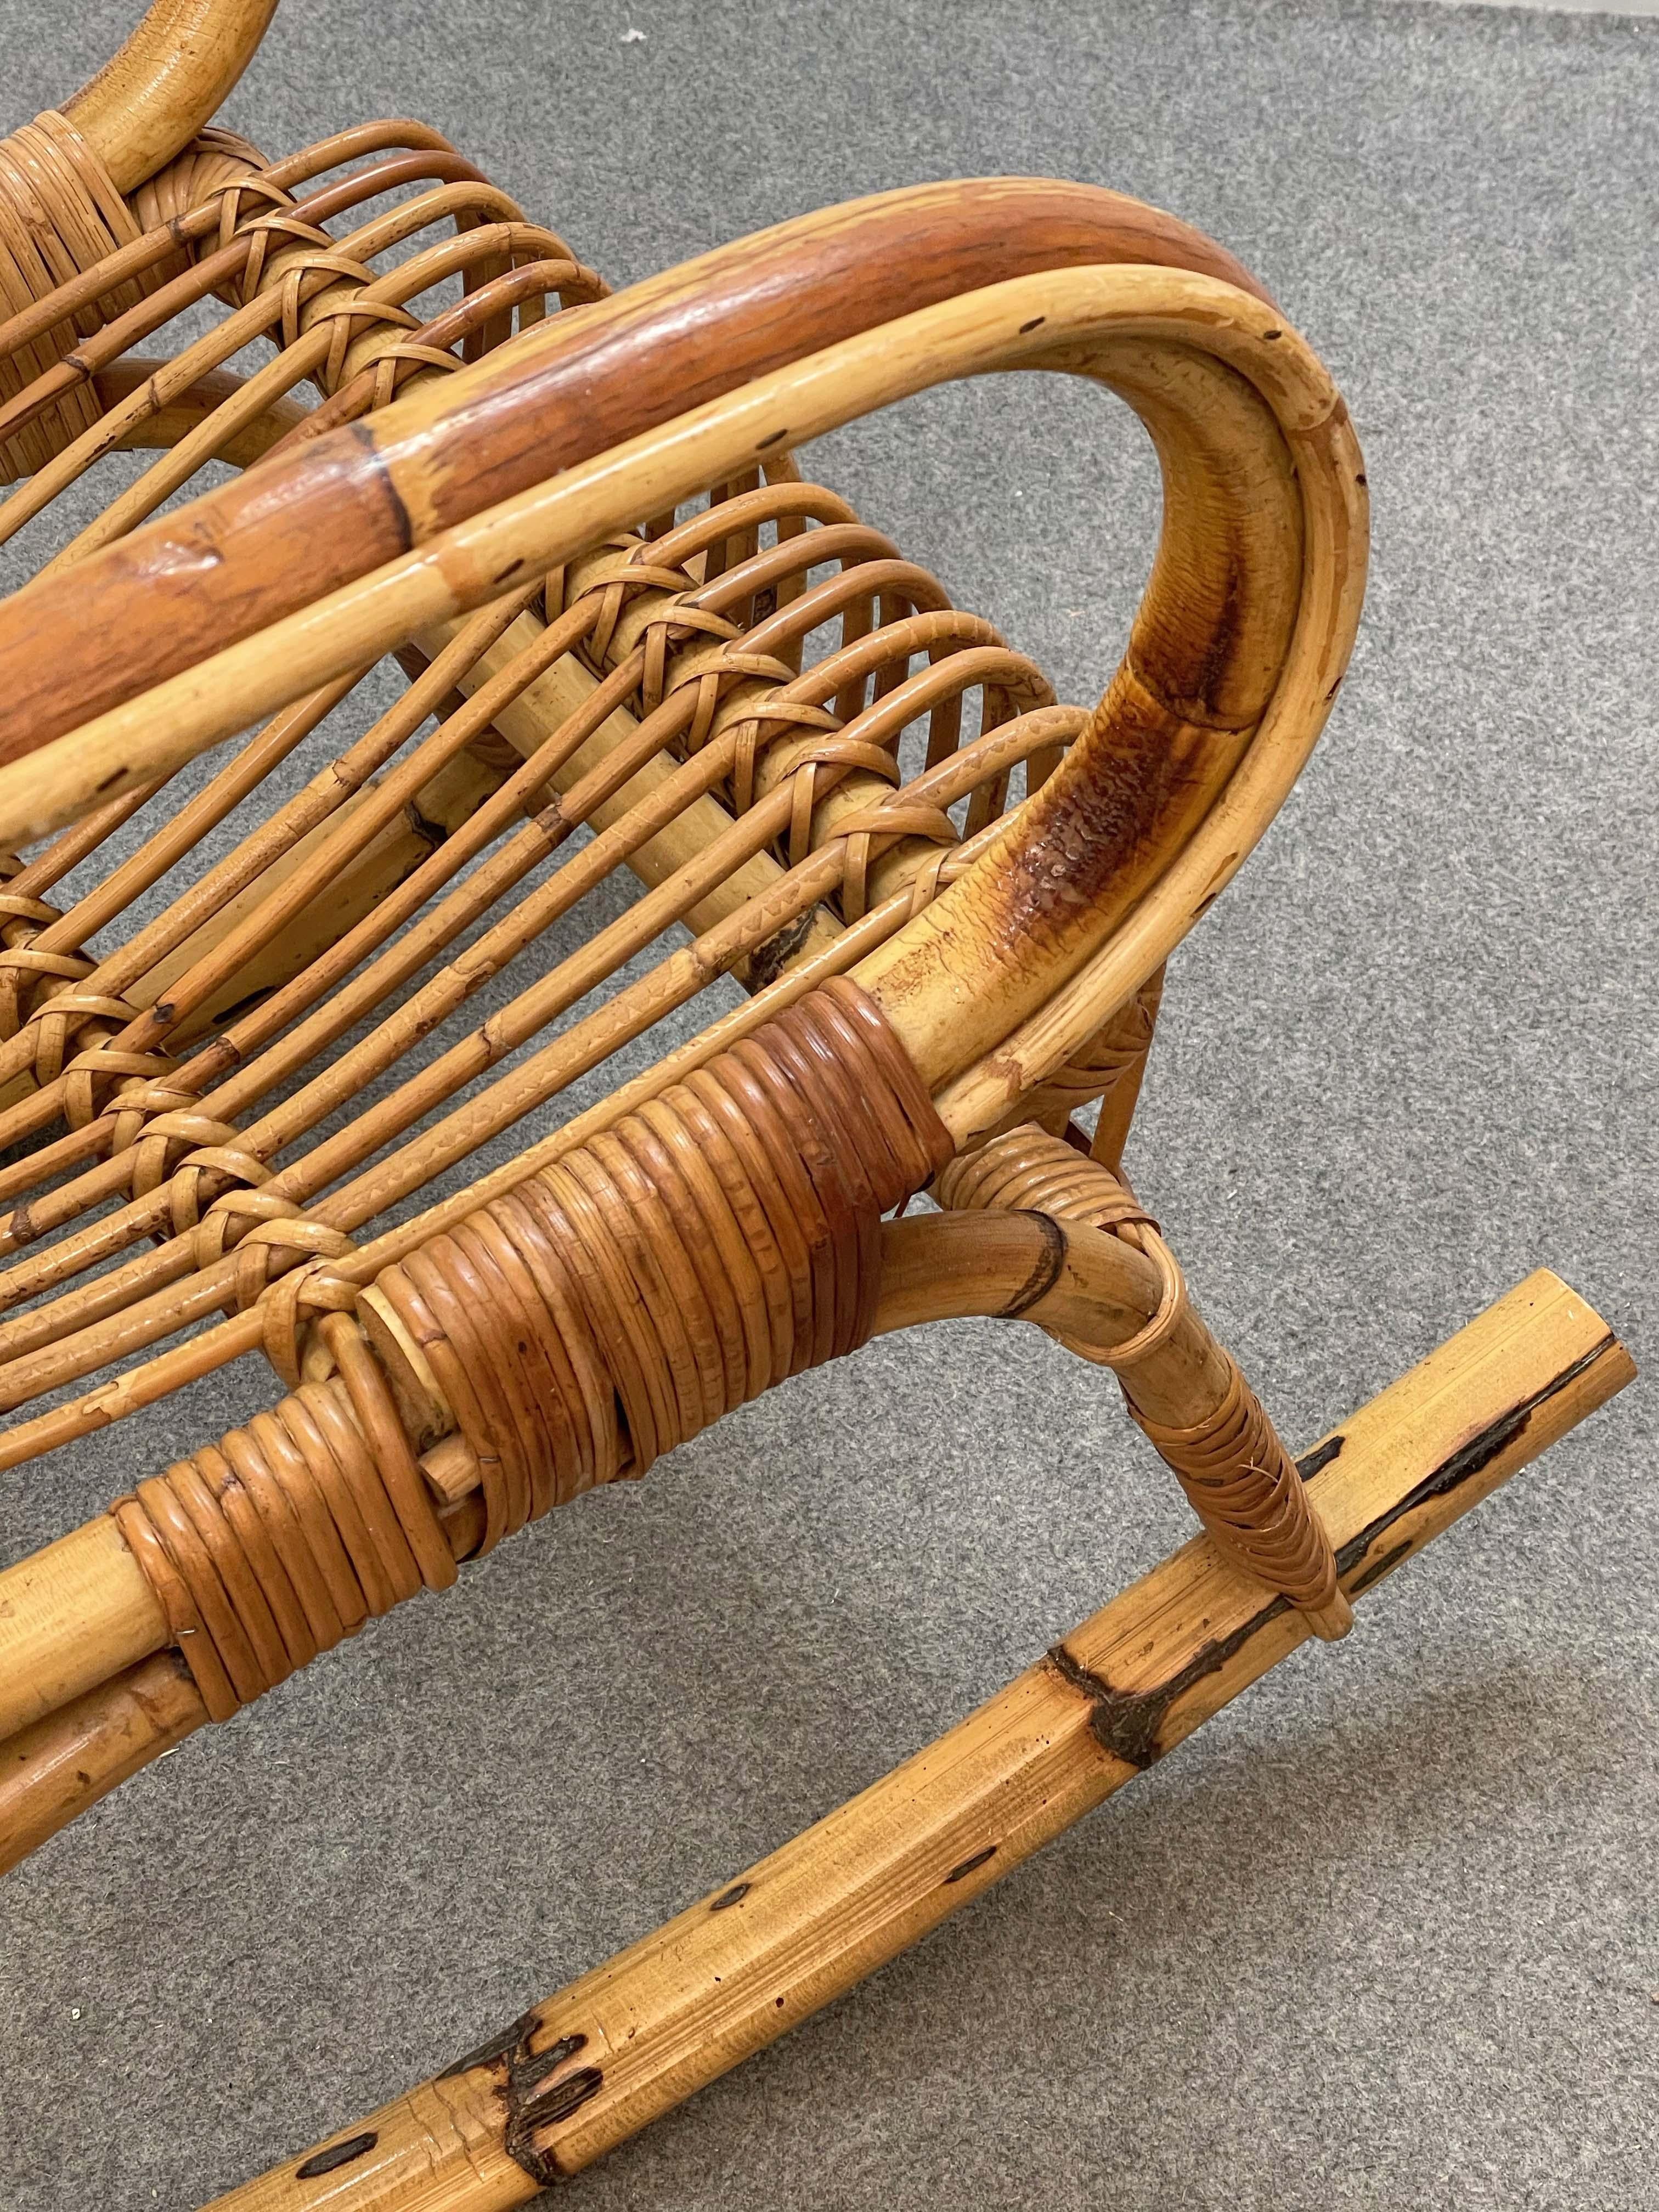 Midcentury French Riviera Rattan and Bamboo Italian Rocking Chair, 1960s For Sale 5